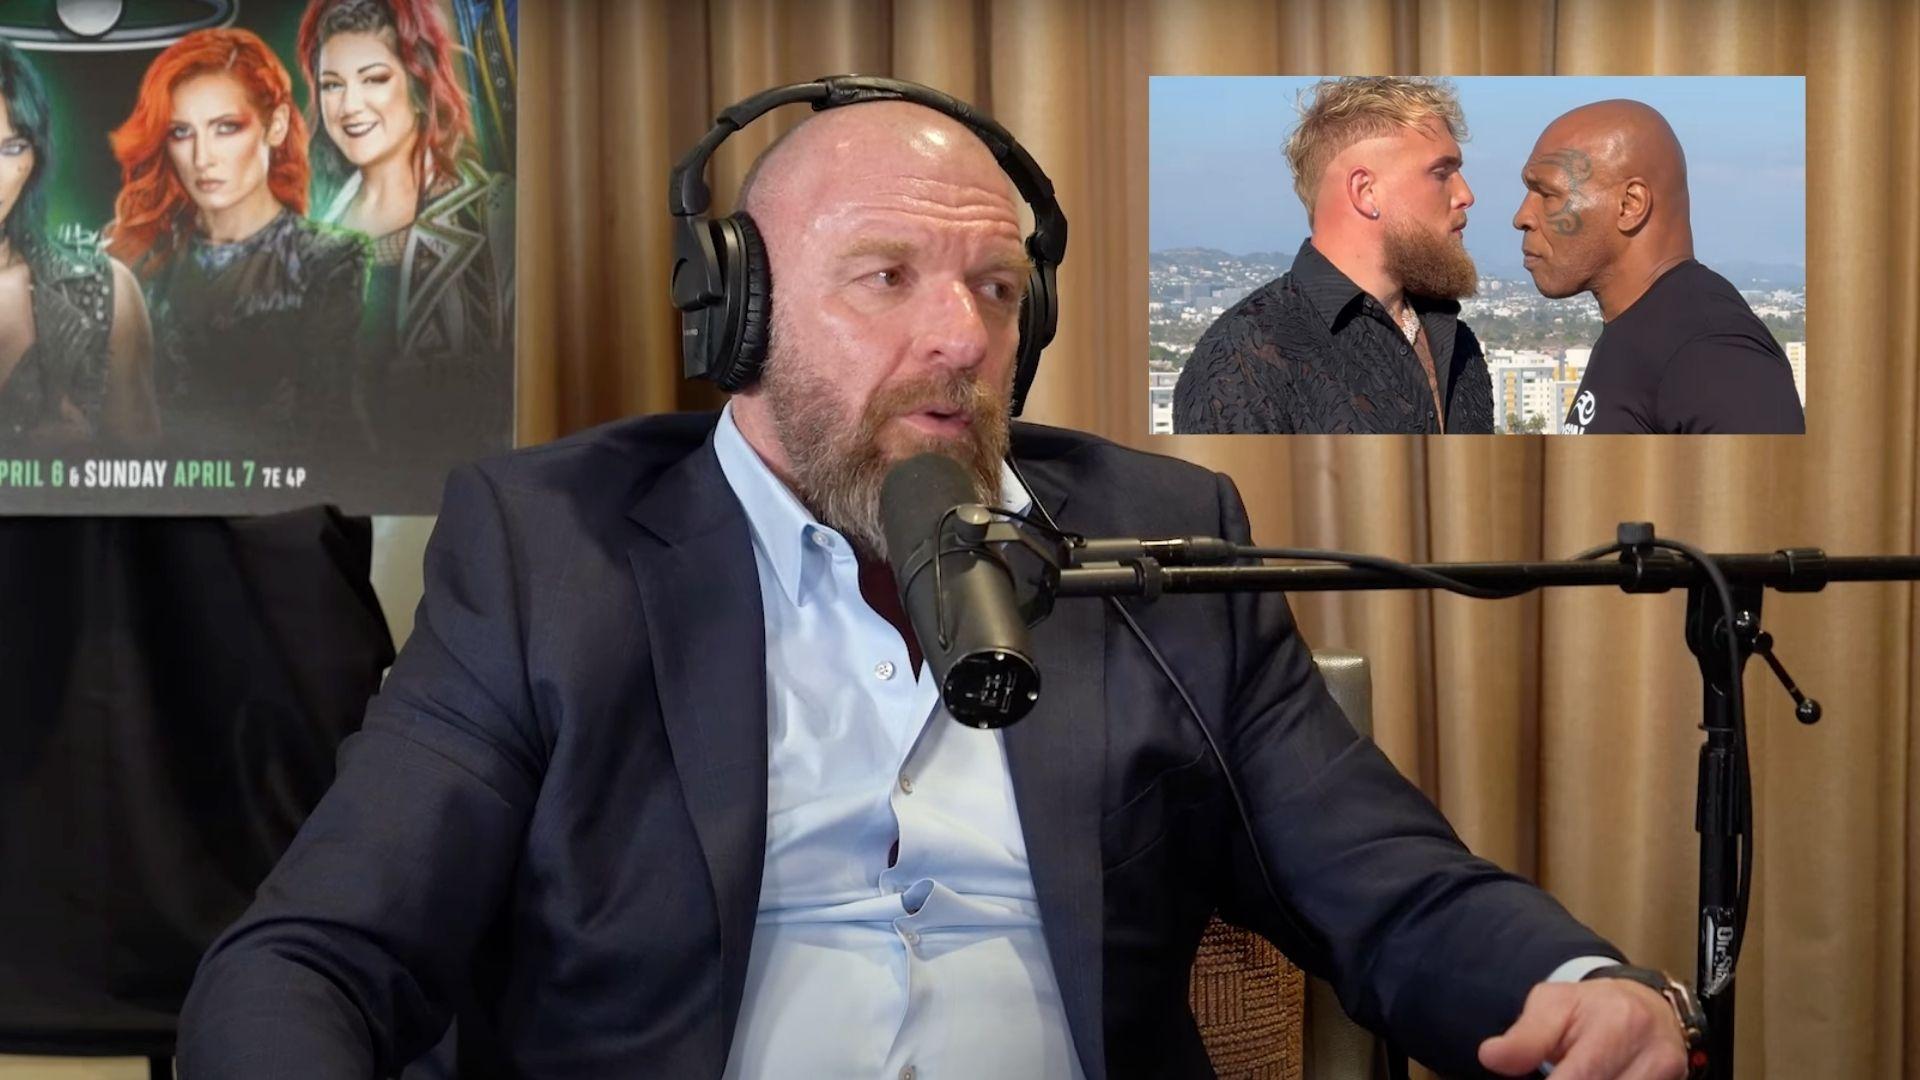 Triple H, Jake Paul and Mike Tyson